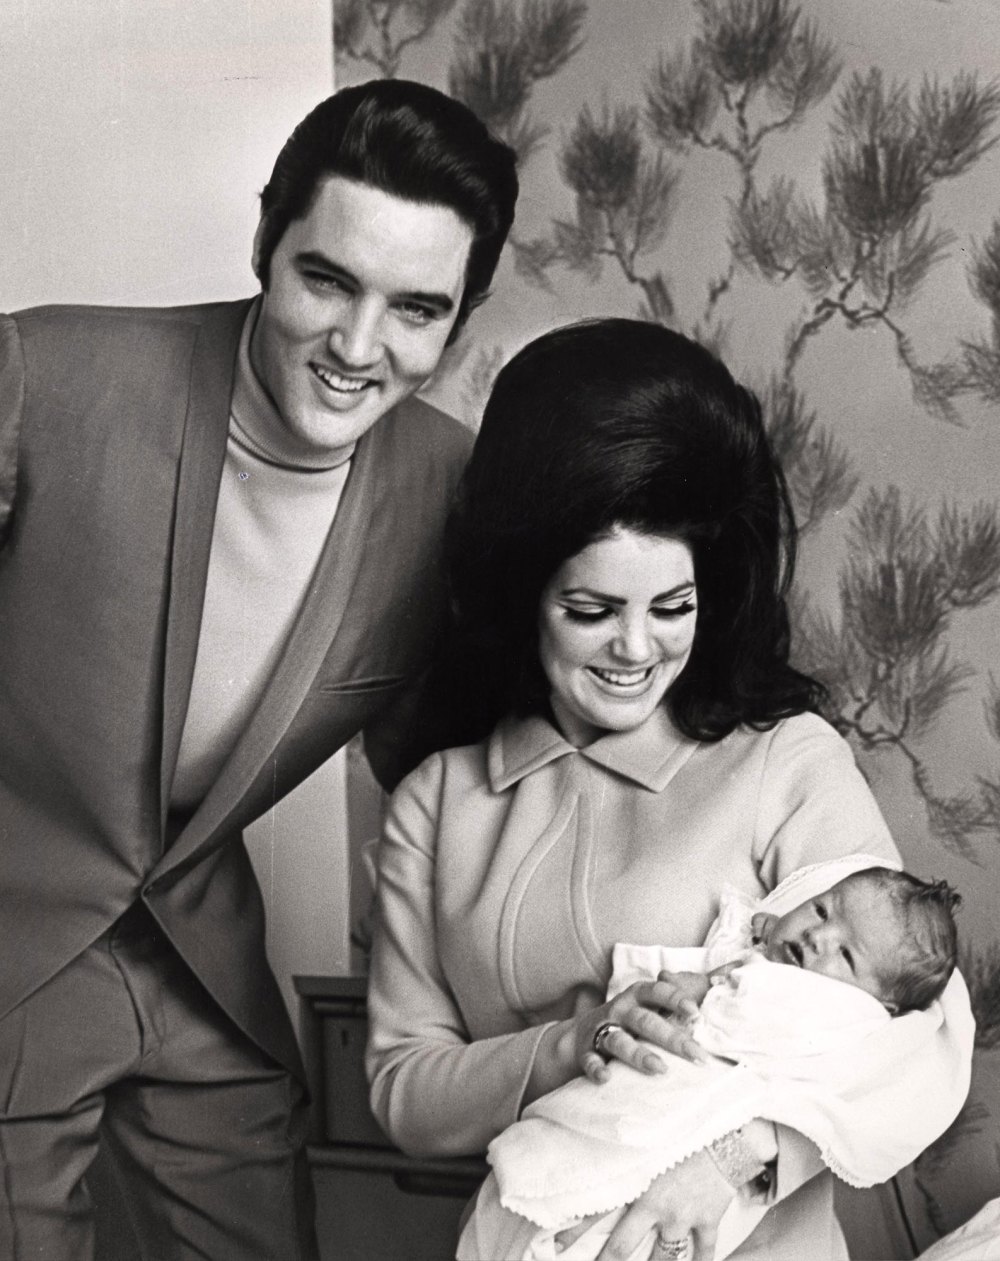 Priscilla Presley Reminisces About Elvis Presley: “He Was the Real Deal”